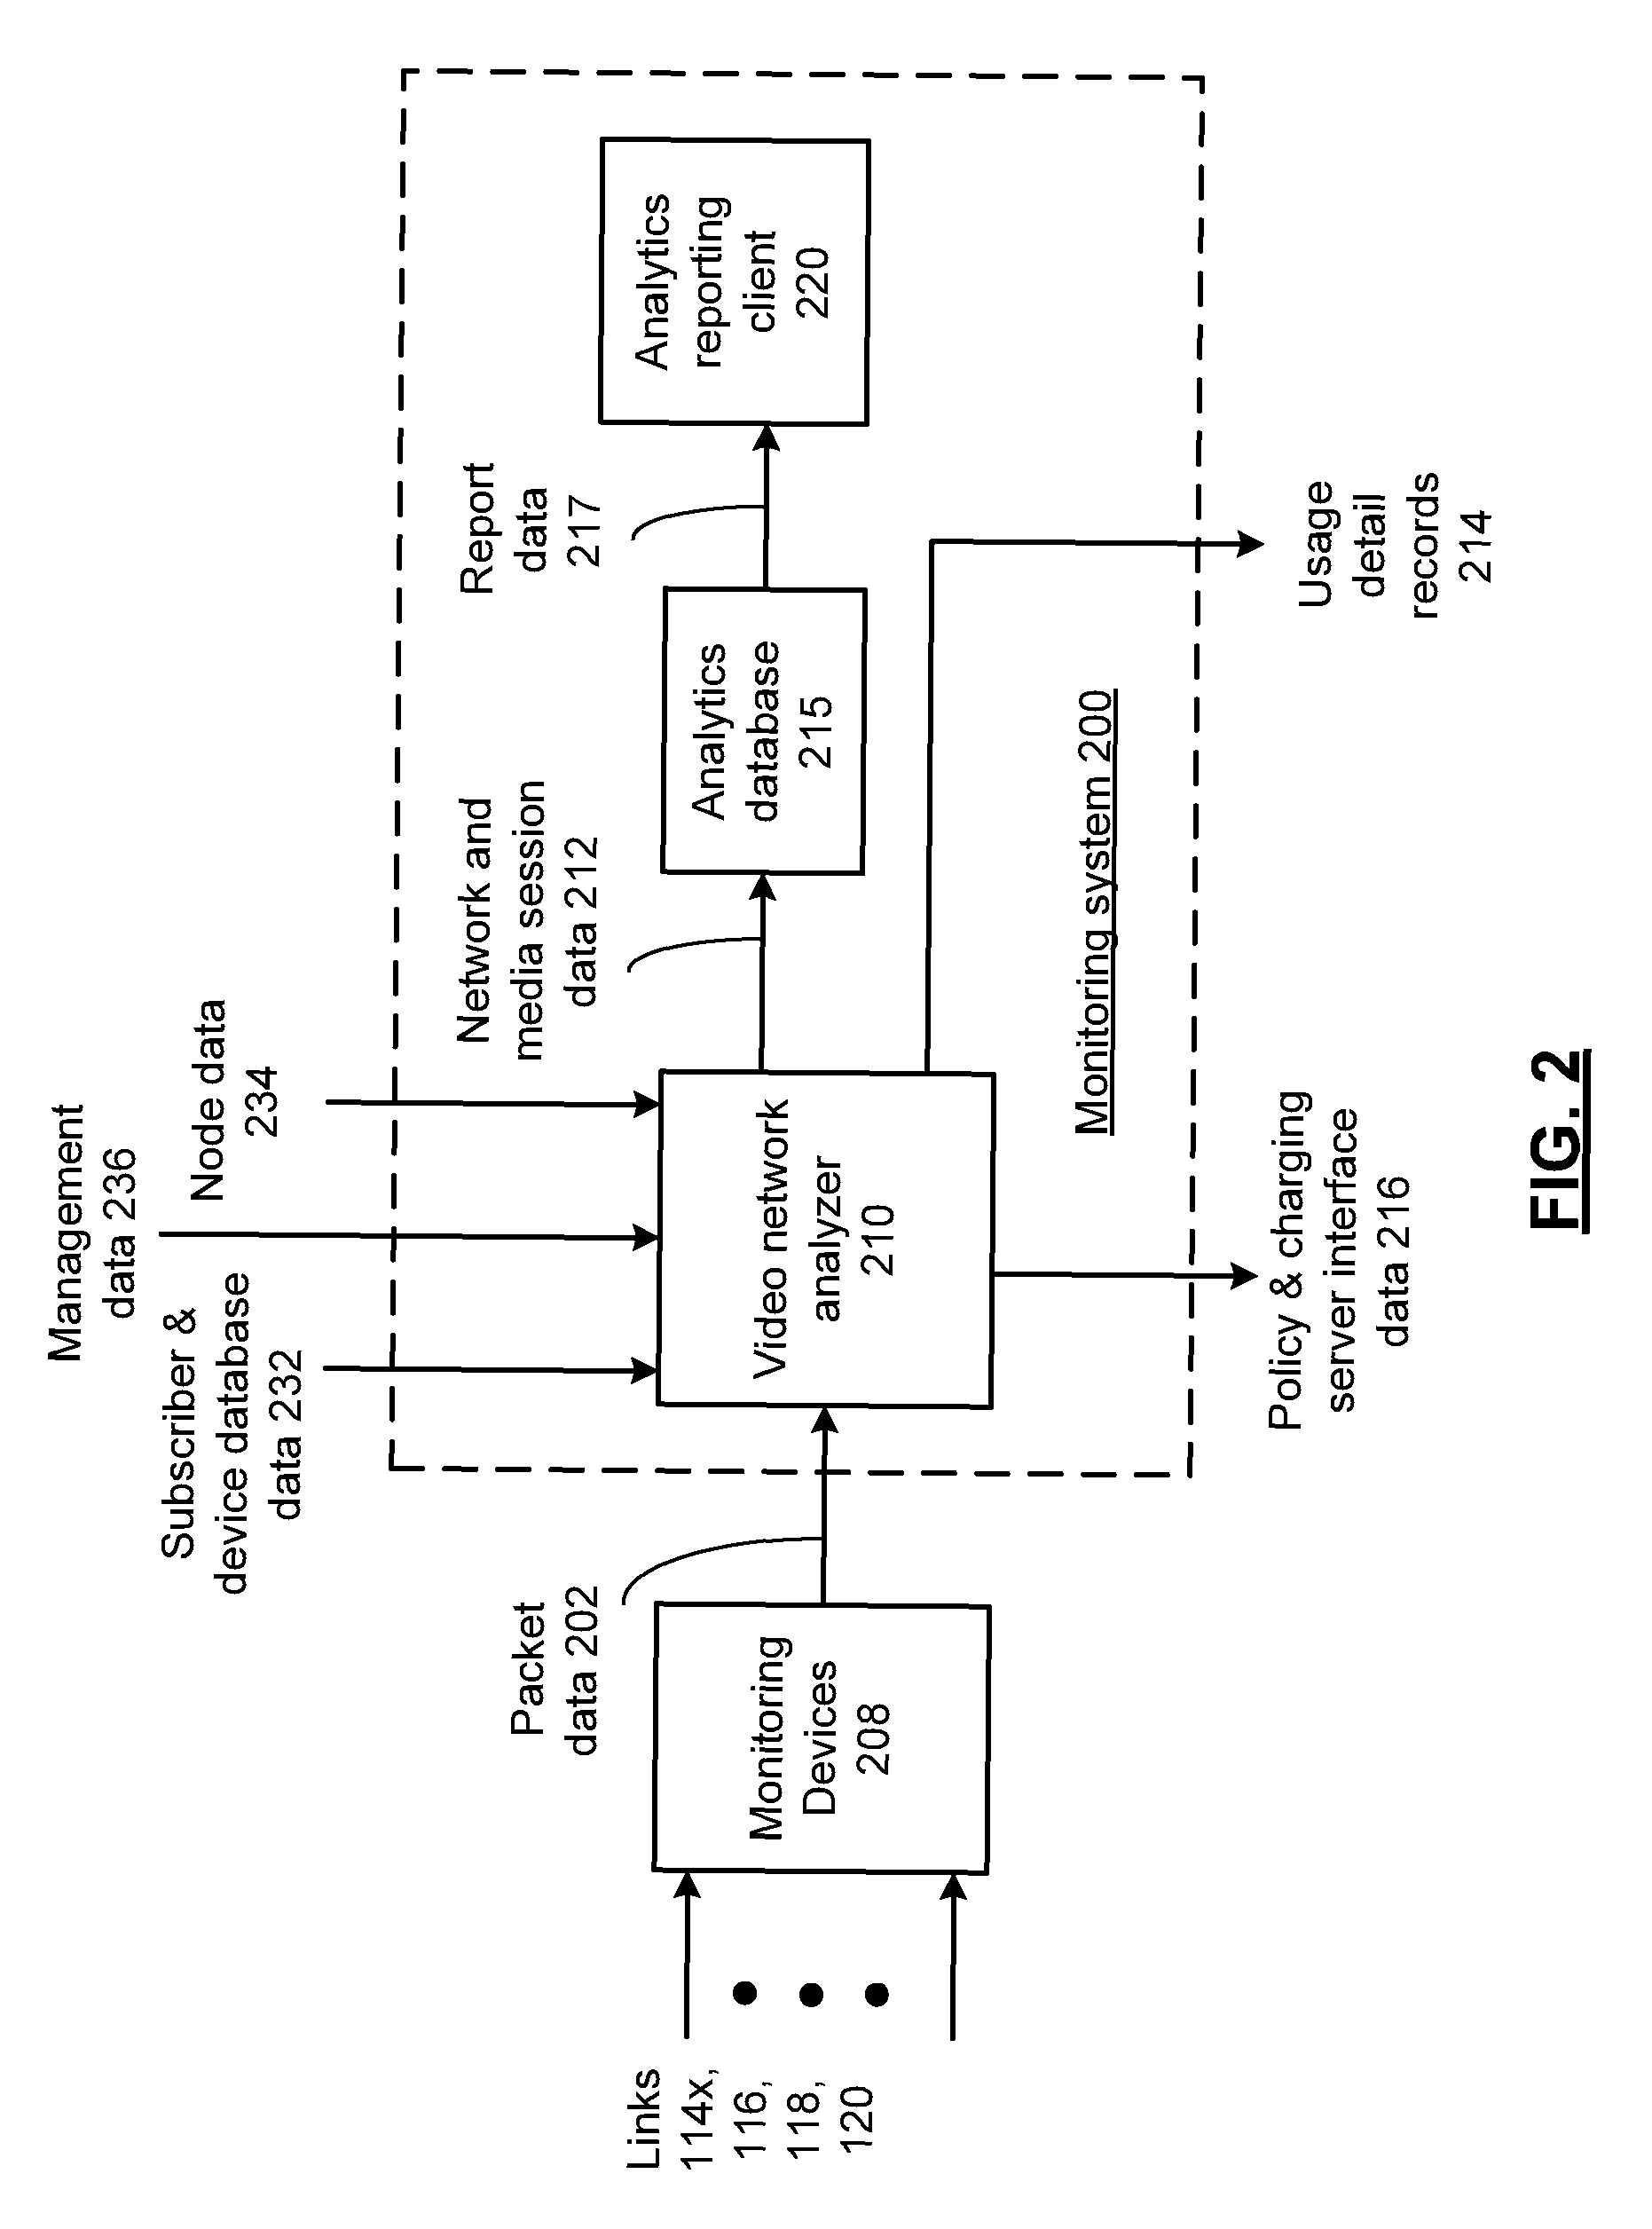 System for monitoring a video network and methods for use therewith